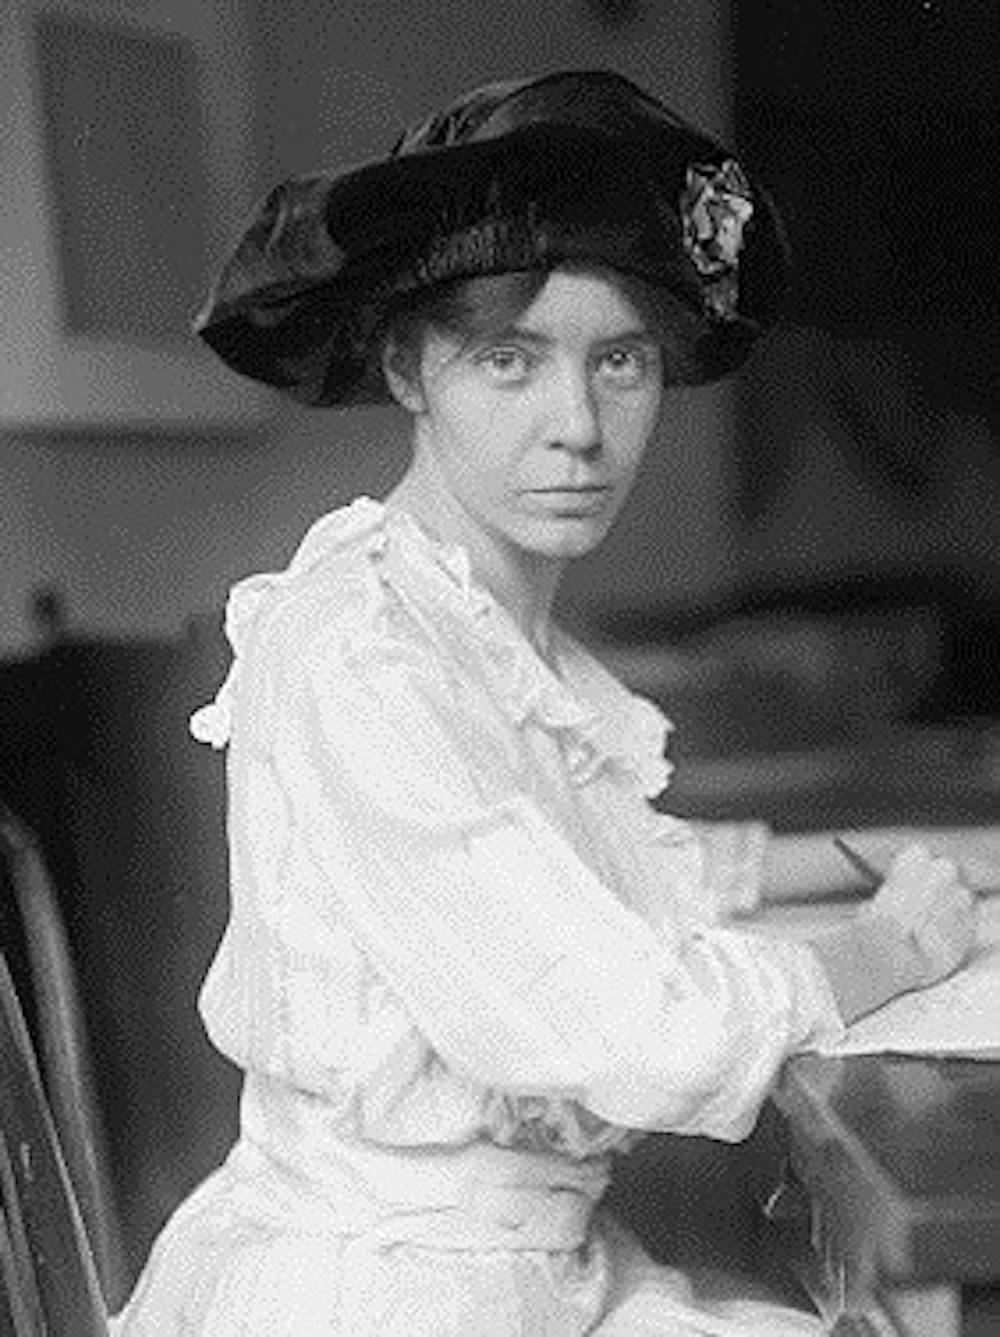 Alice Paul, who received her M.A. from Penn in 1907 and her Ph.D. in 1912, will be featured with other women's suffrage activists on the back of the redesigned $10 bill. | Photo courtesy of Wikimedia Commons